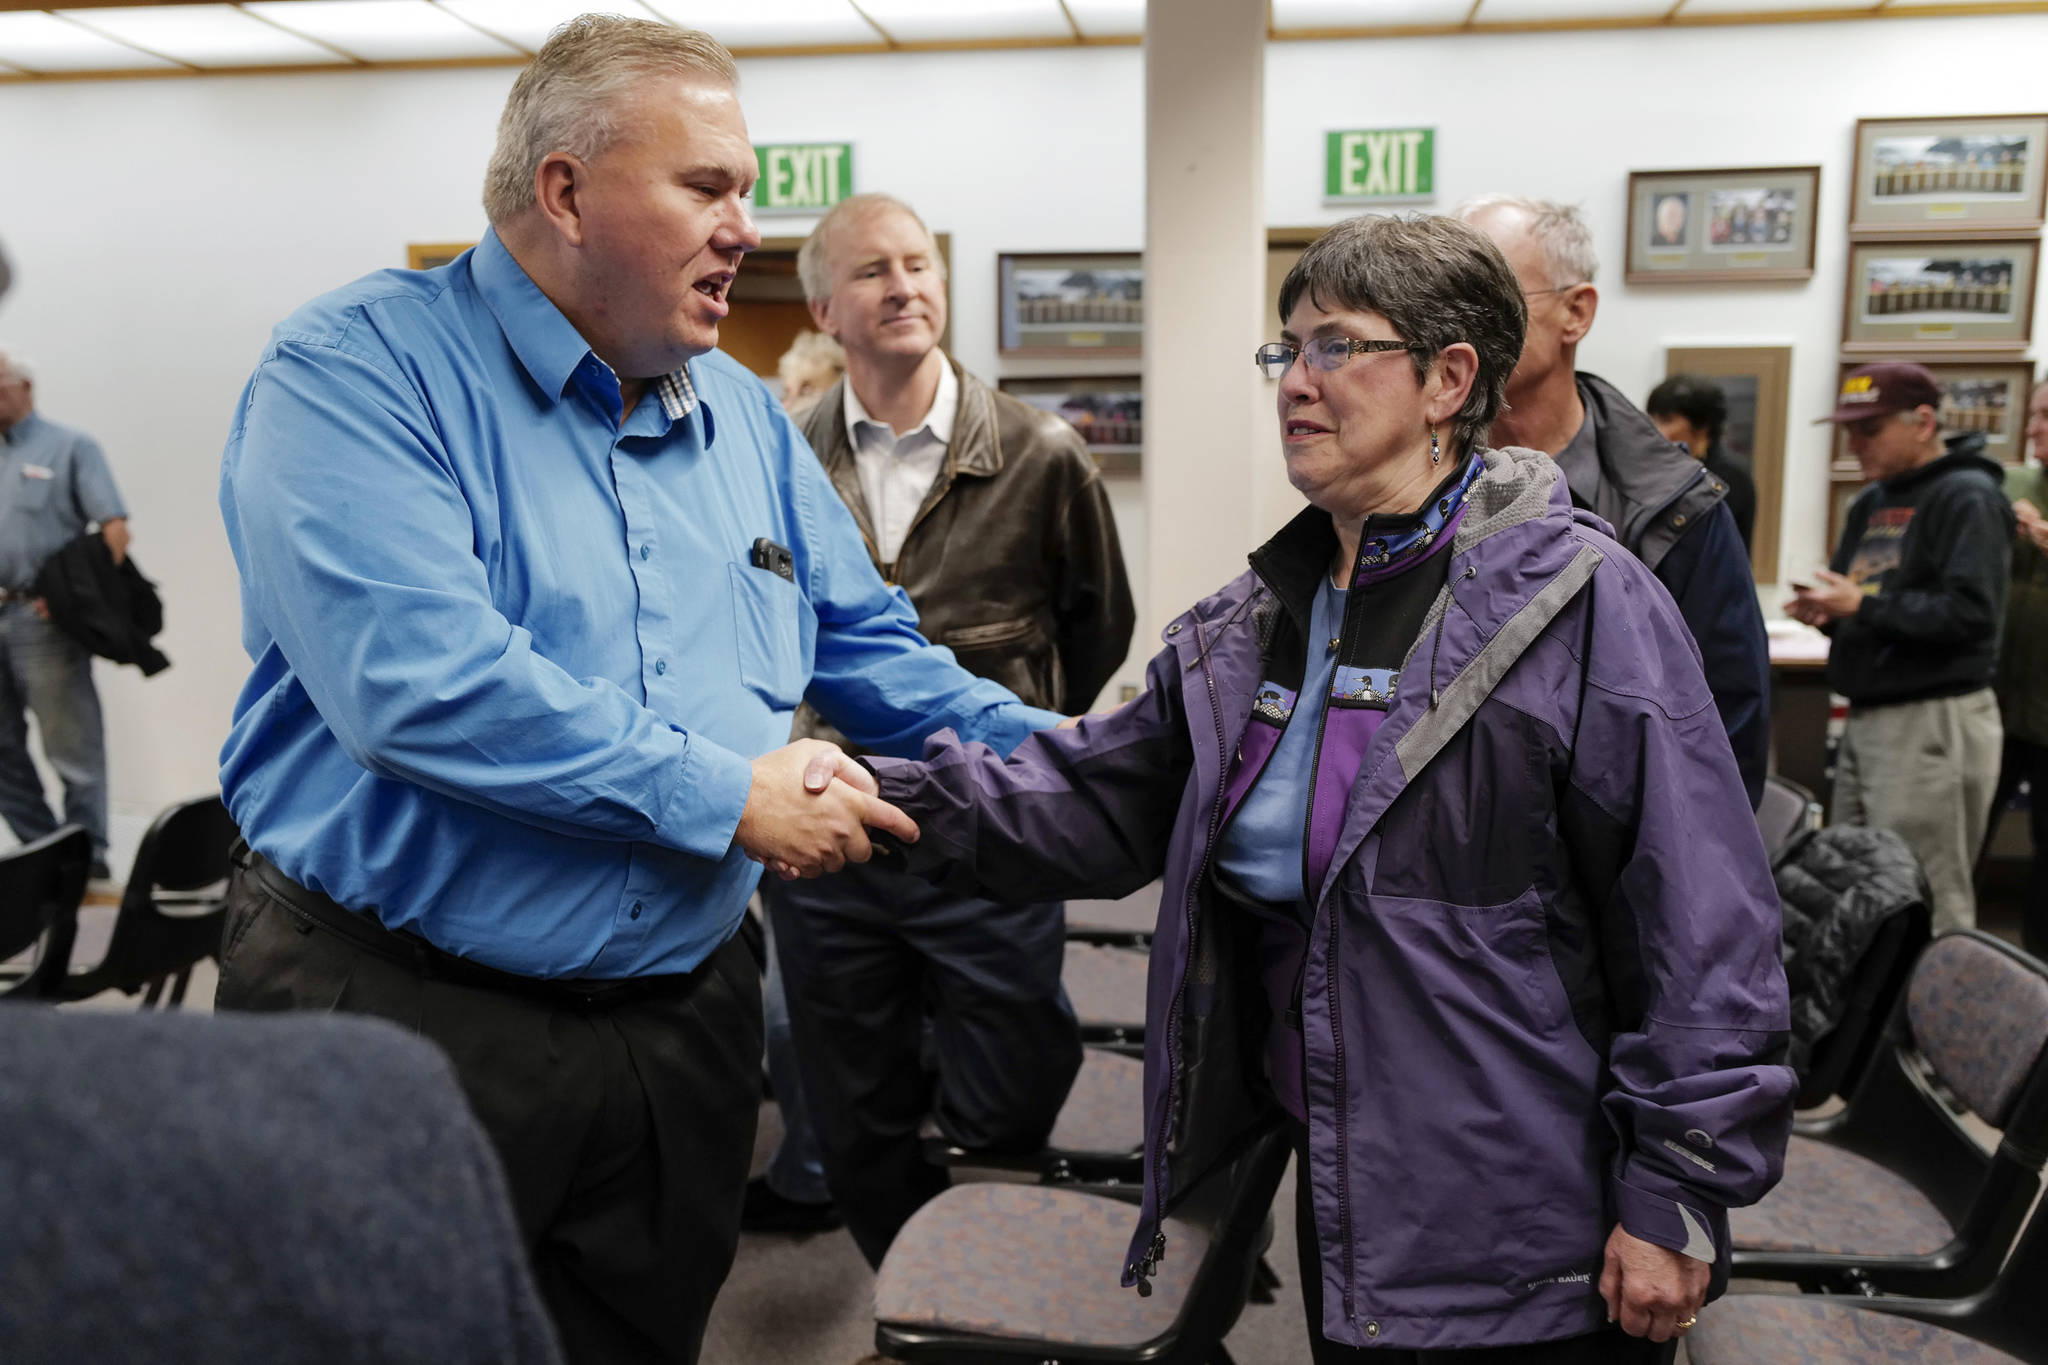 School board candidates Emil Mackey and Deedie Sorensen greet each other at City Hall on Tuesday, Oct. 1, 2019. (Michael Penn | Juneau Empire)